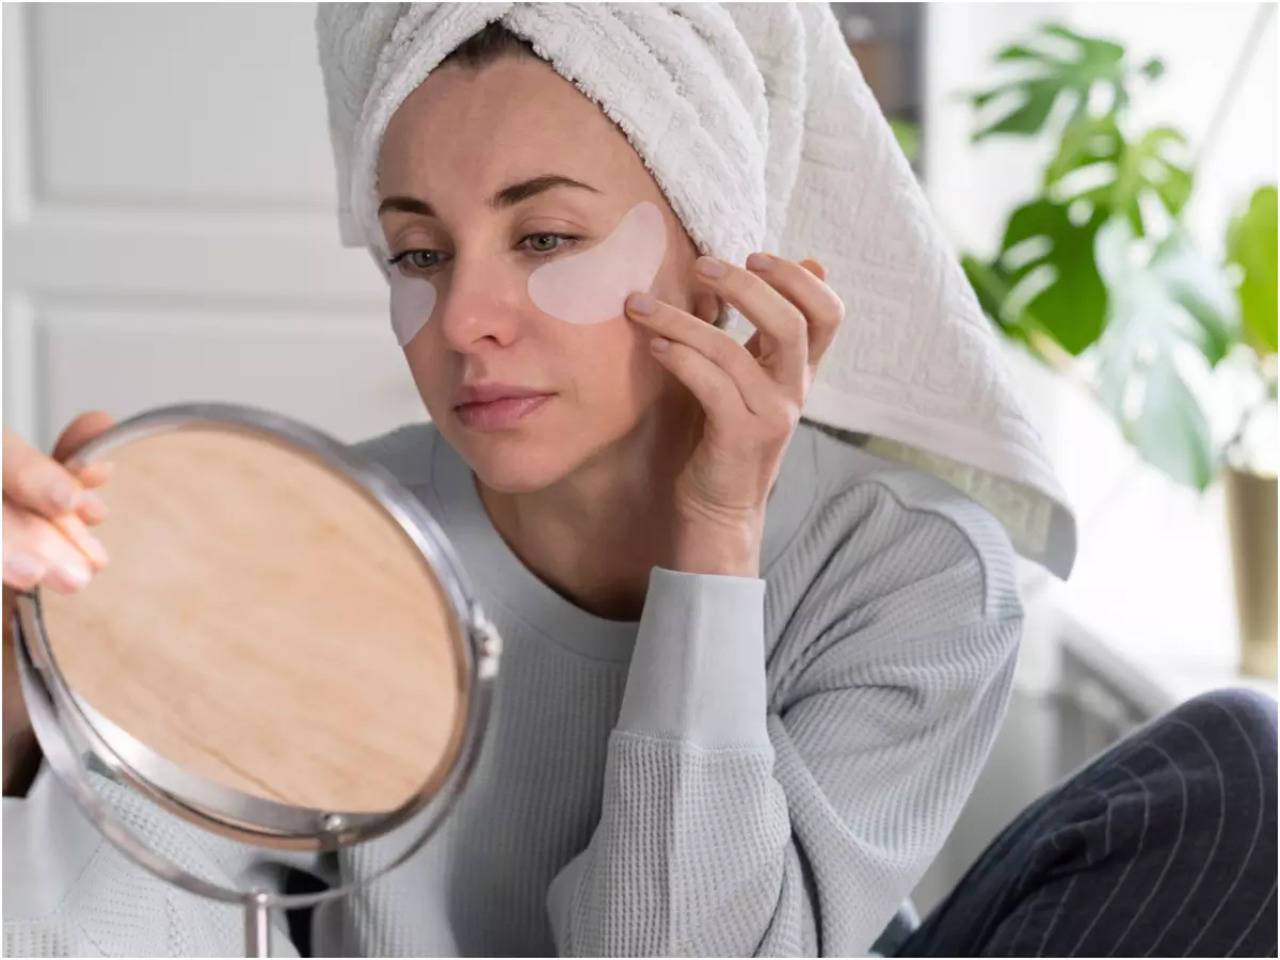 4 super tips to fix puffy eyes - Times of India